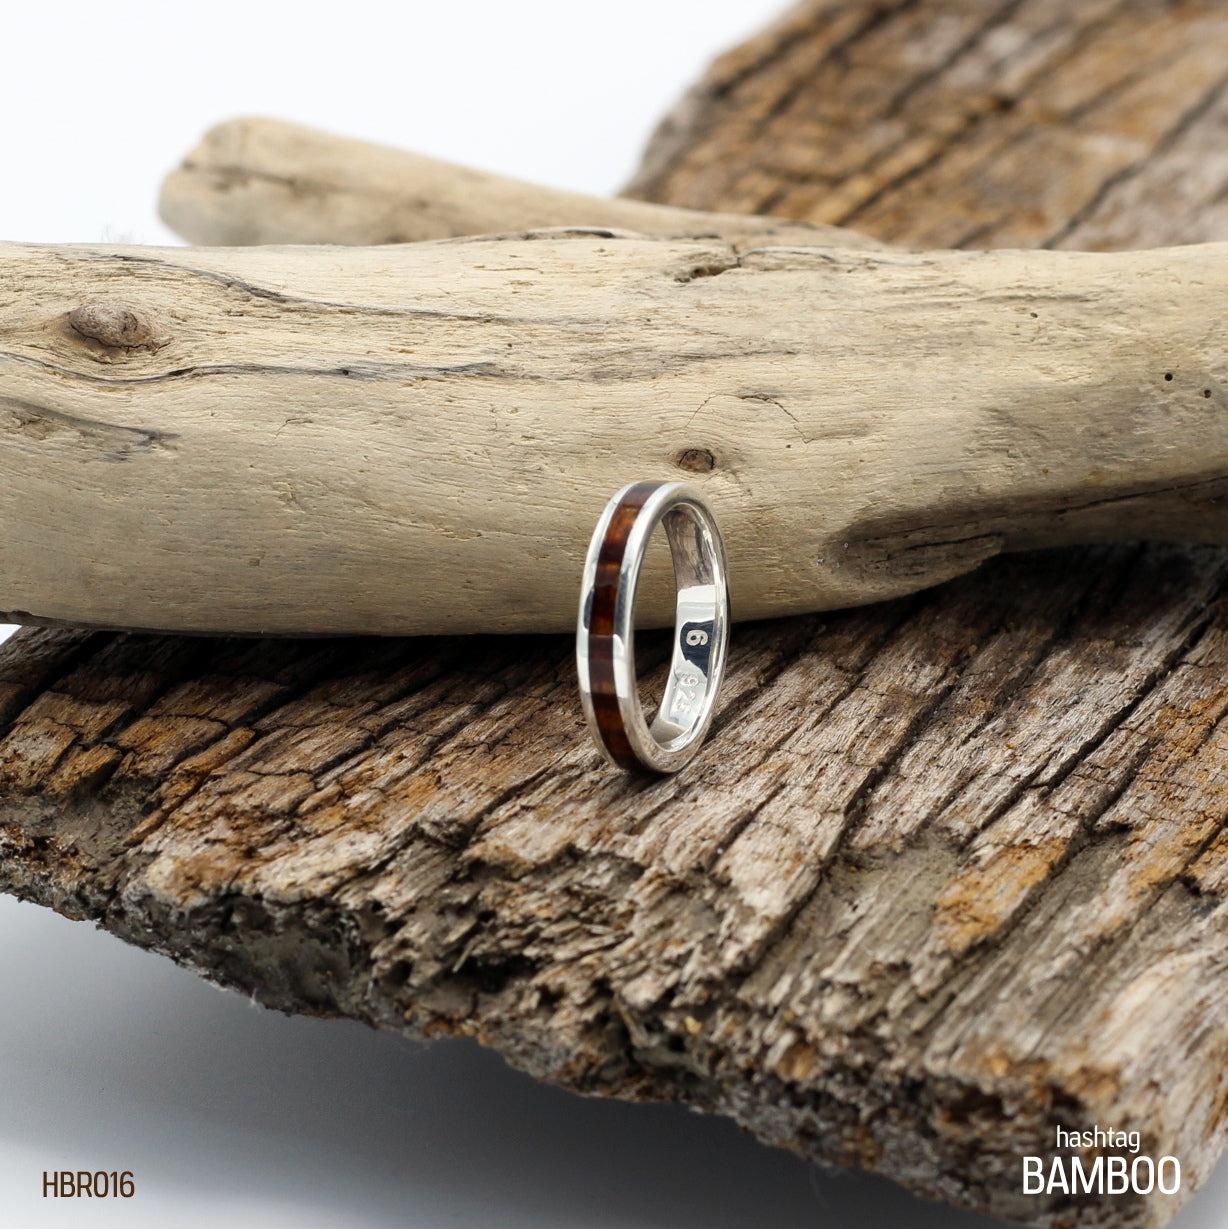 LADIES RING 925 Sterling Silver with Koa Wood Inlay - Hashtag Bamboo